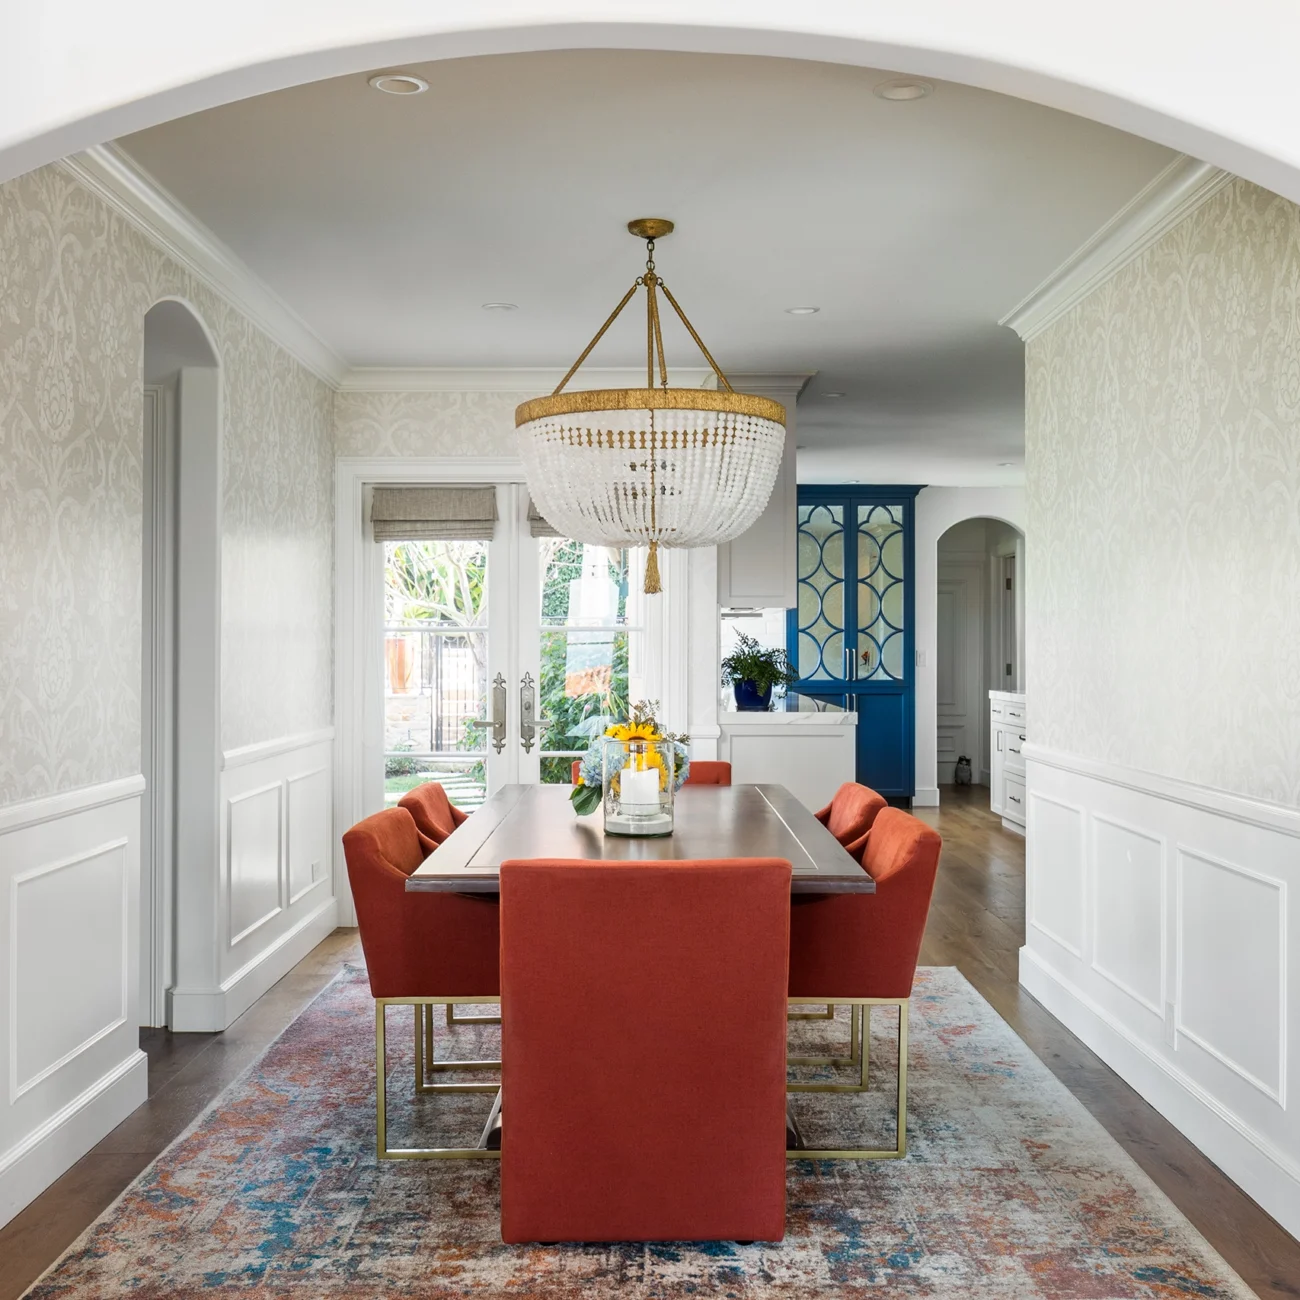 Christine Vroom Interiors | Via-Arriba | Brightly colored dining room with chandelier